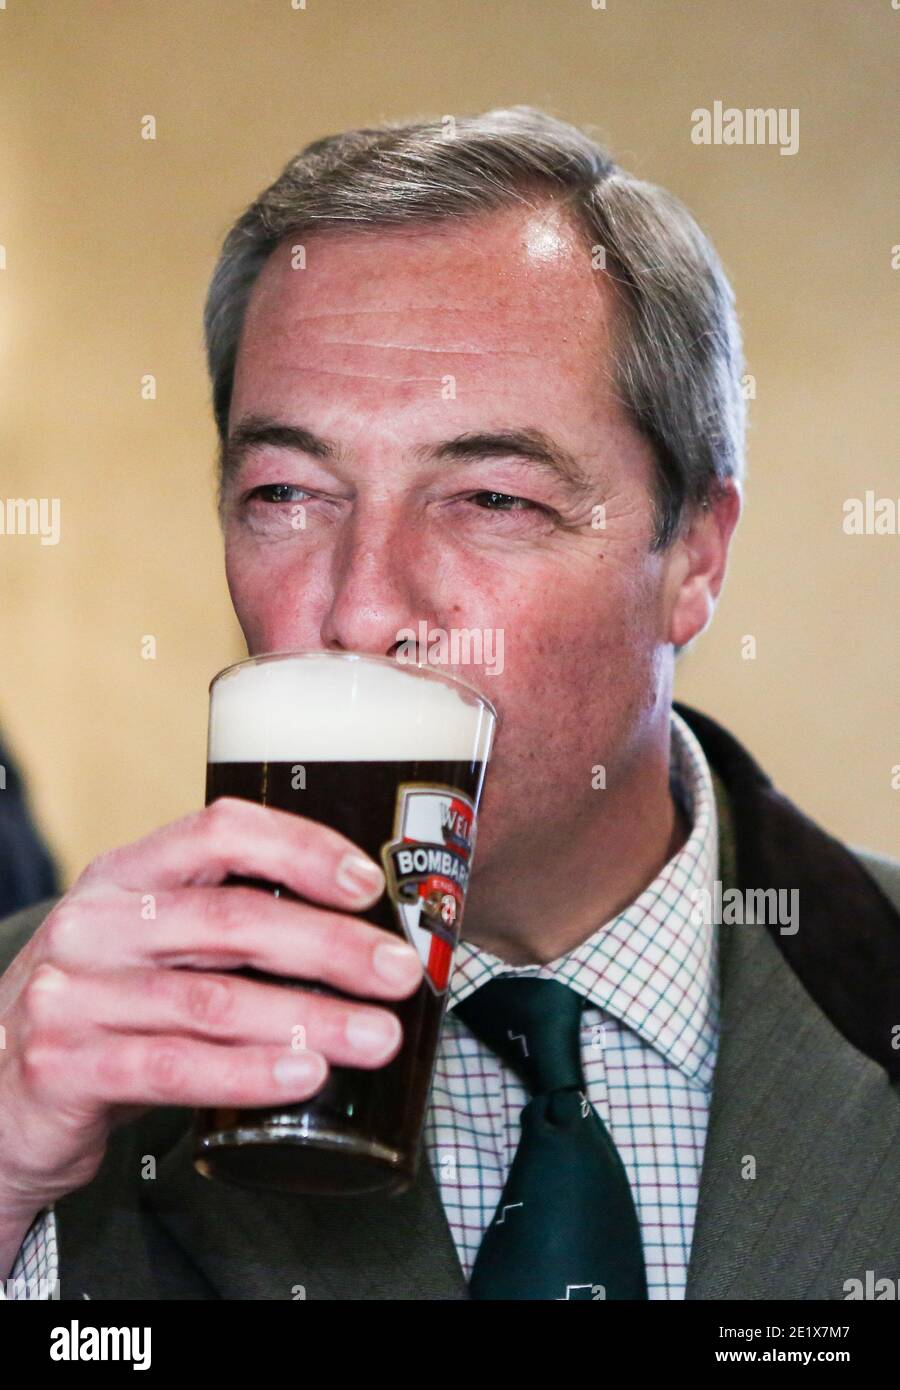 05/12/16. Sleaford, UK. Former UKIP leader Nigel Farage drinks a pint of beer in a pub in Sleaford, Lincolnshire, with Victoria Ayling, UKIP's candida Stock Photo